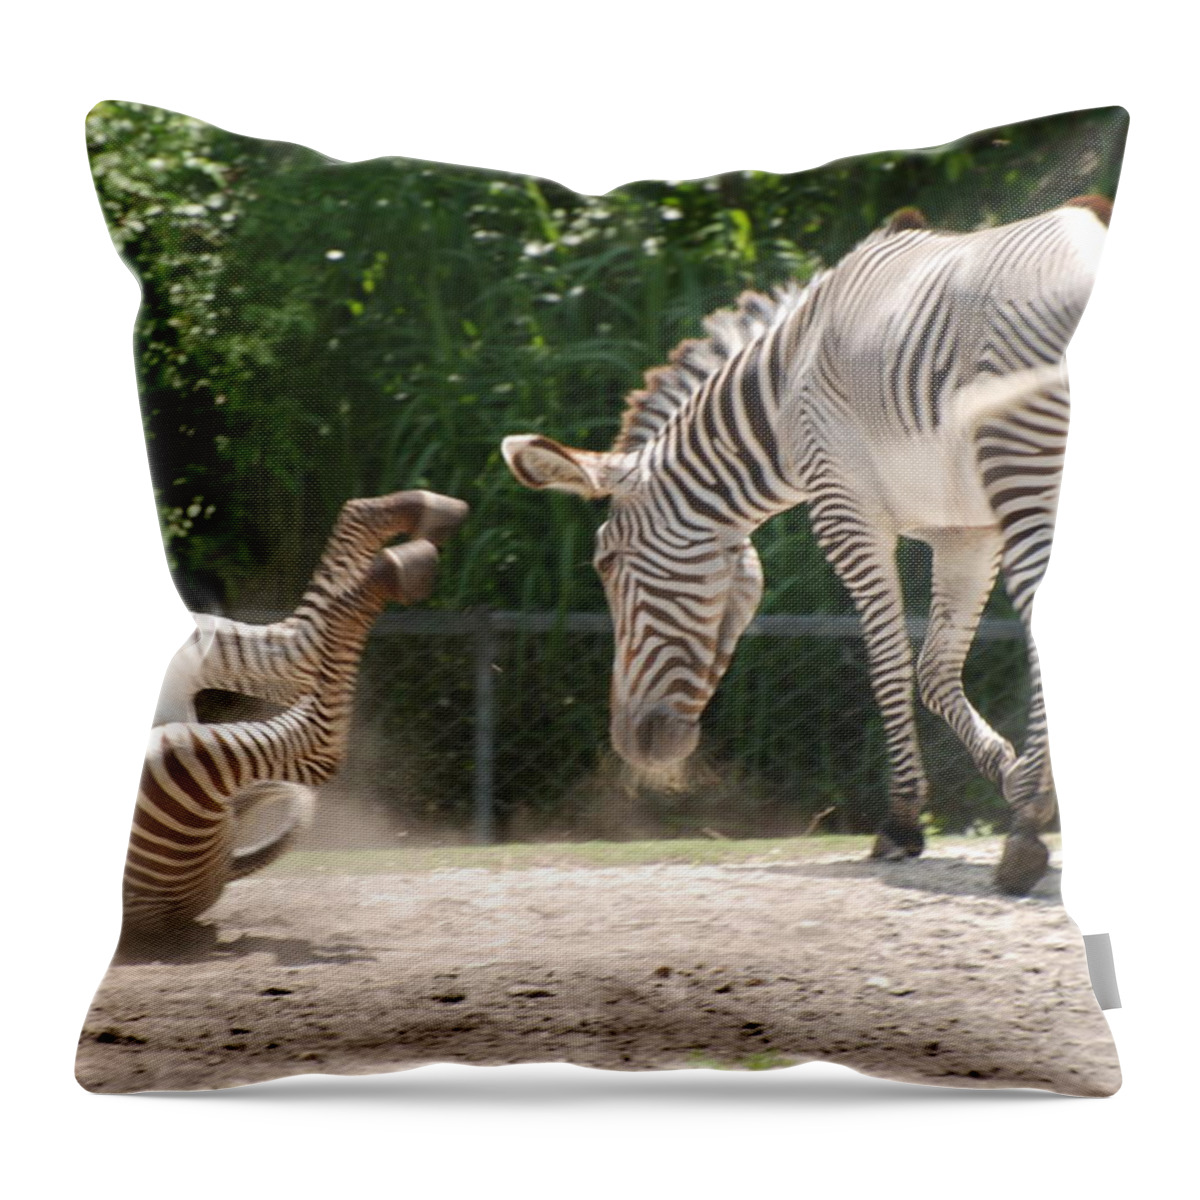 Animal Throw Pillow featuring the photograph The Back End by Rob Hans